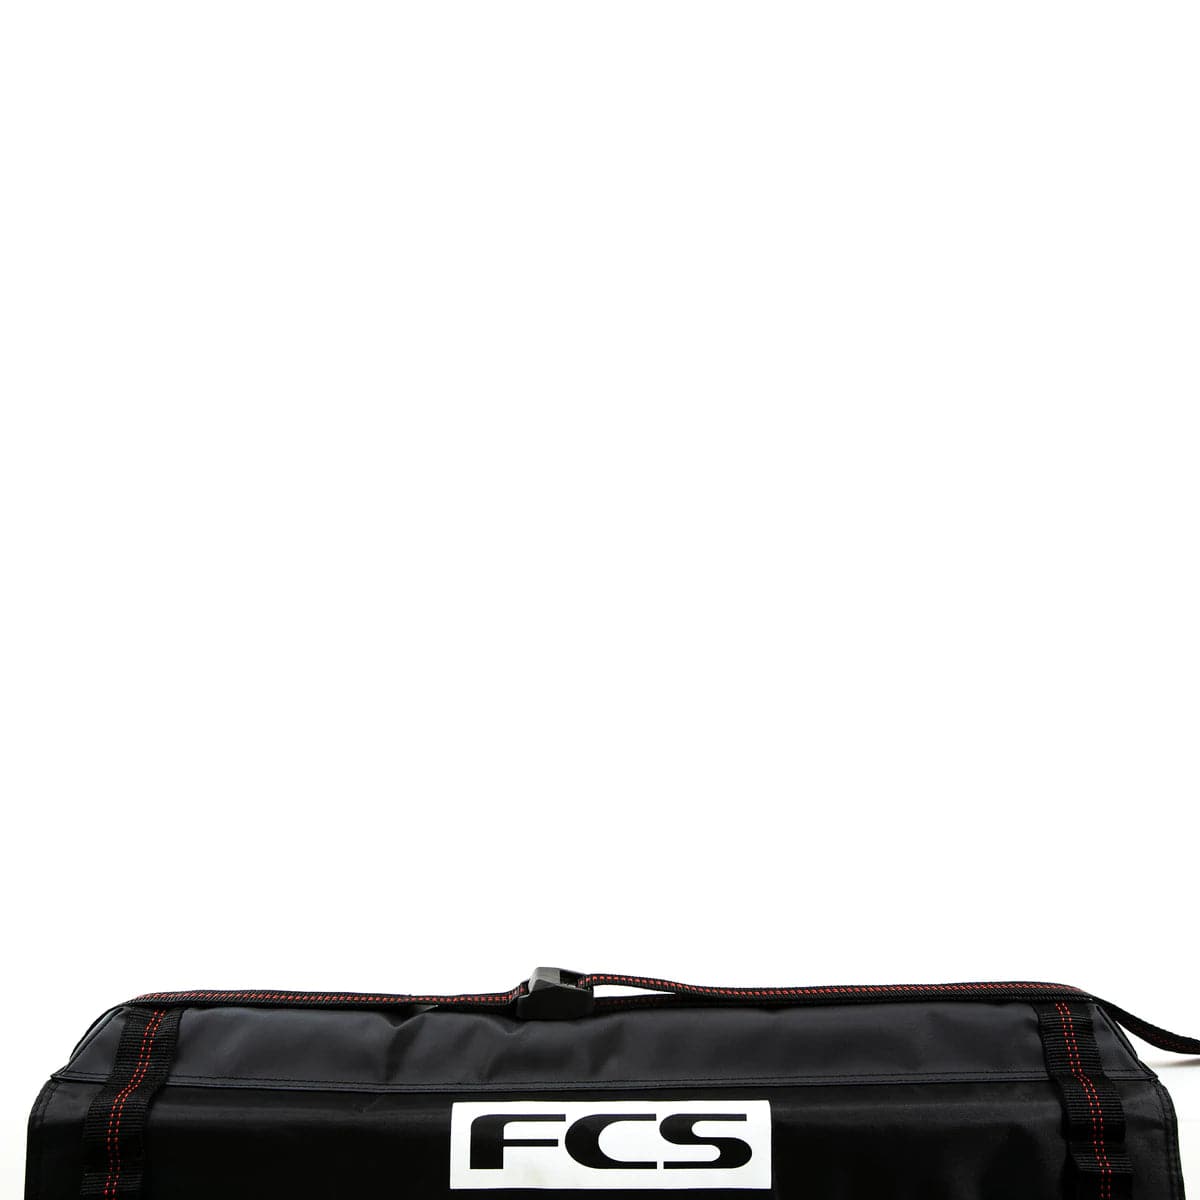 Featuring the FCS Tail Gate System sup accessory, sup fin manufactured by FCS shown here from a second angle.